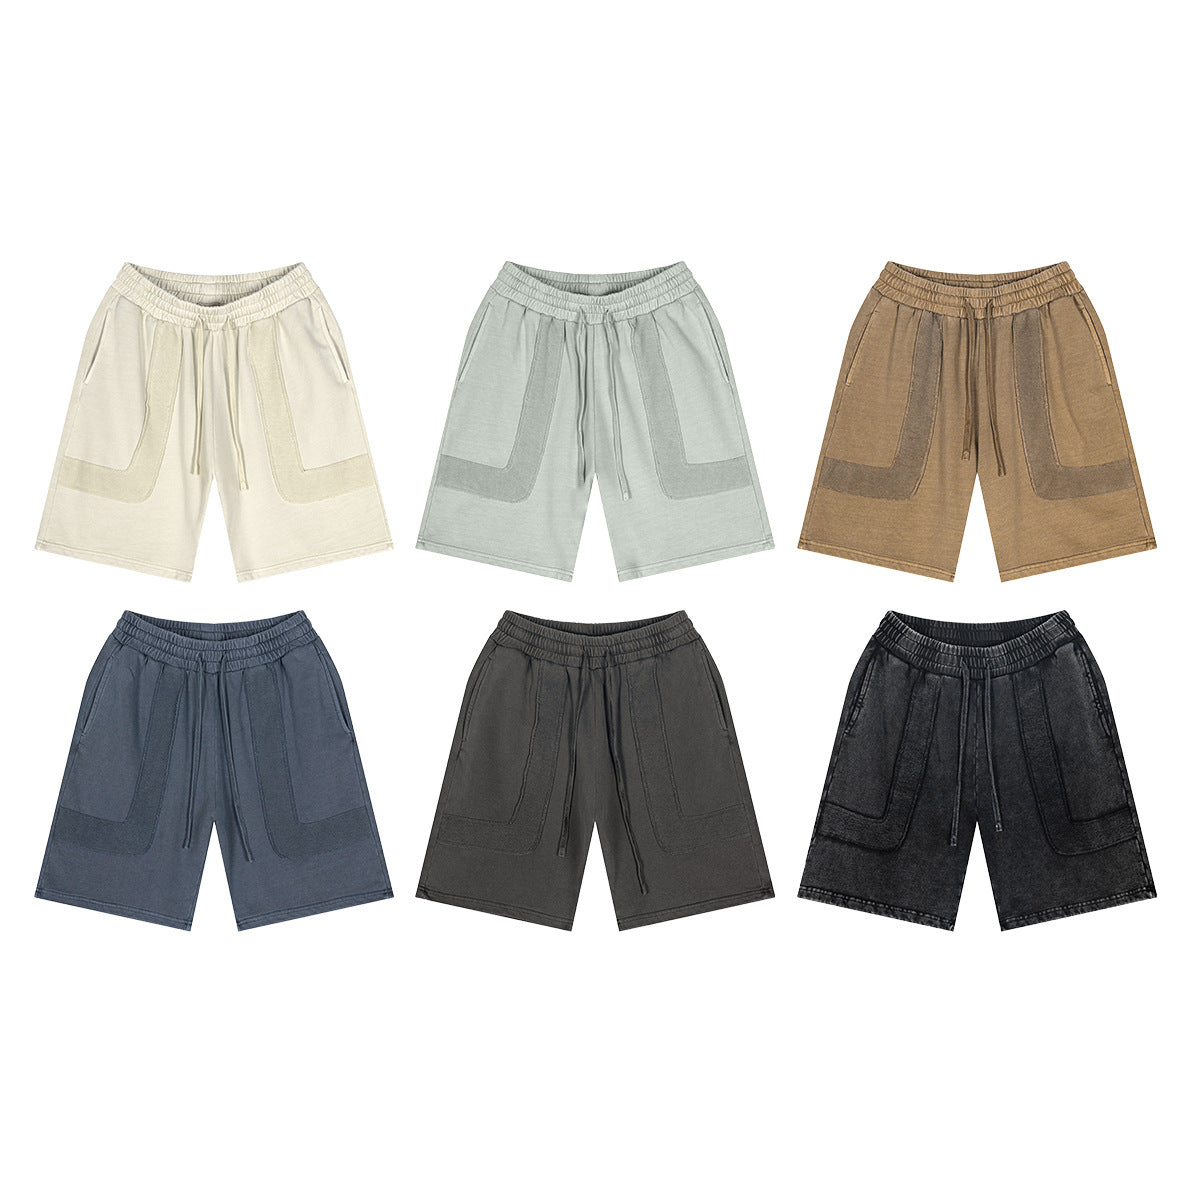 Washed Heavyweight Sporty Short Pants WN6172